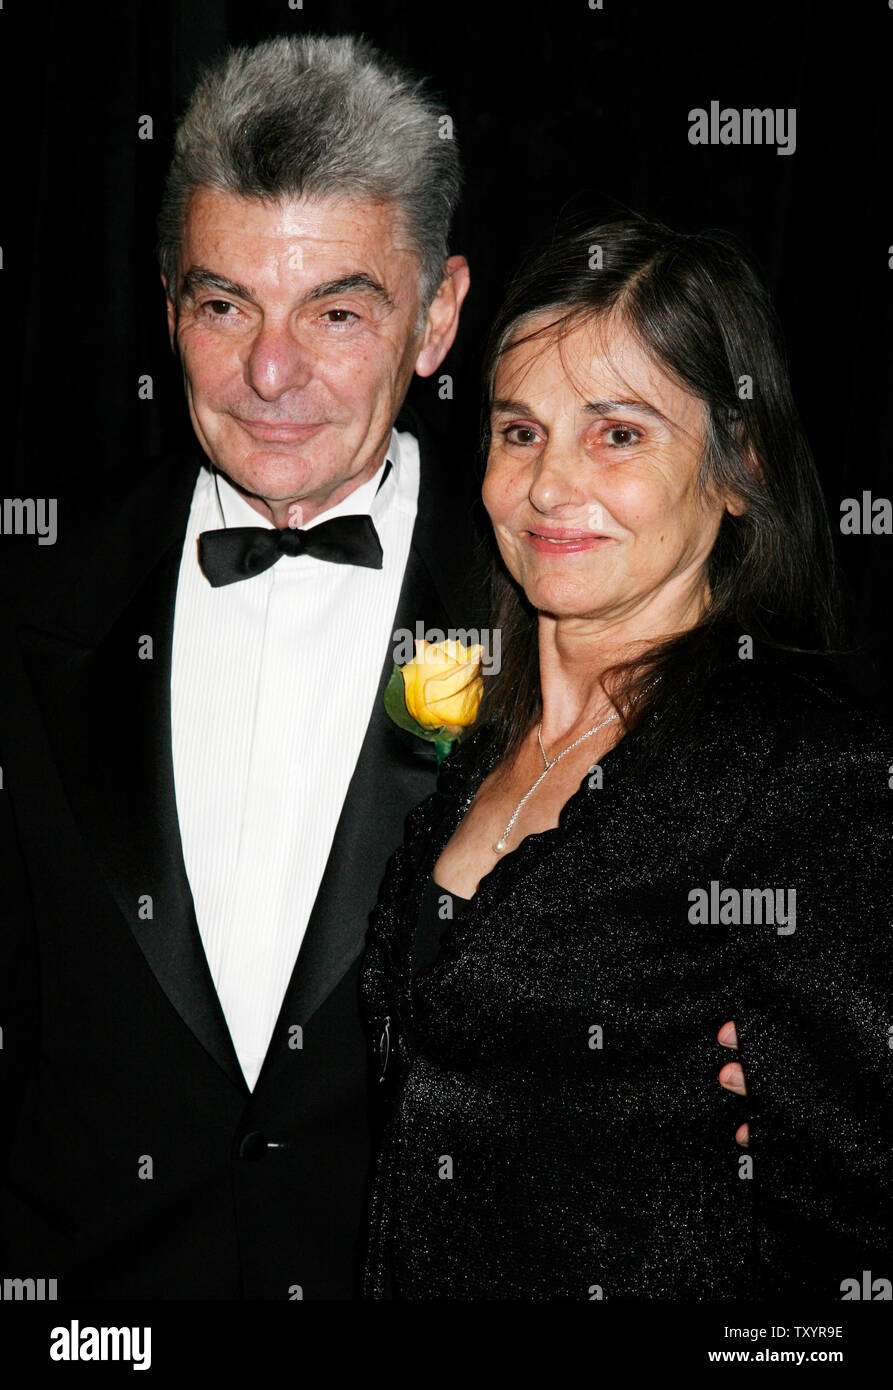 Actor Richard Benjamin and his wife actress Paula Prentiss arrive for the American Society of Cinematographers 21st annual Outstanding Achievement Awards at the Century Plaza Hotel in Los Angeles on February 18, 2007.   (UPI Photo/David Silpa) Stock Photo